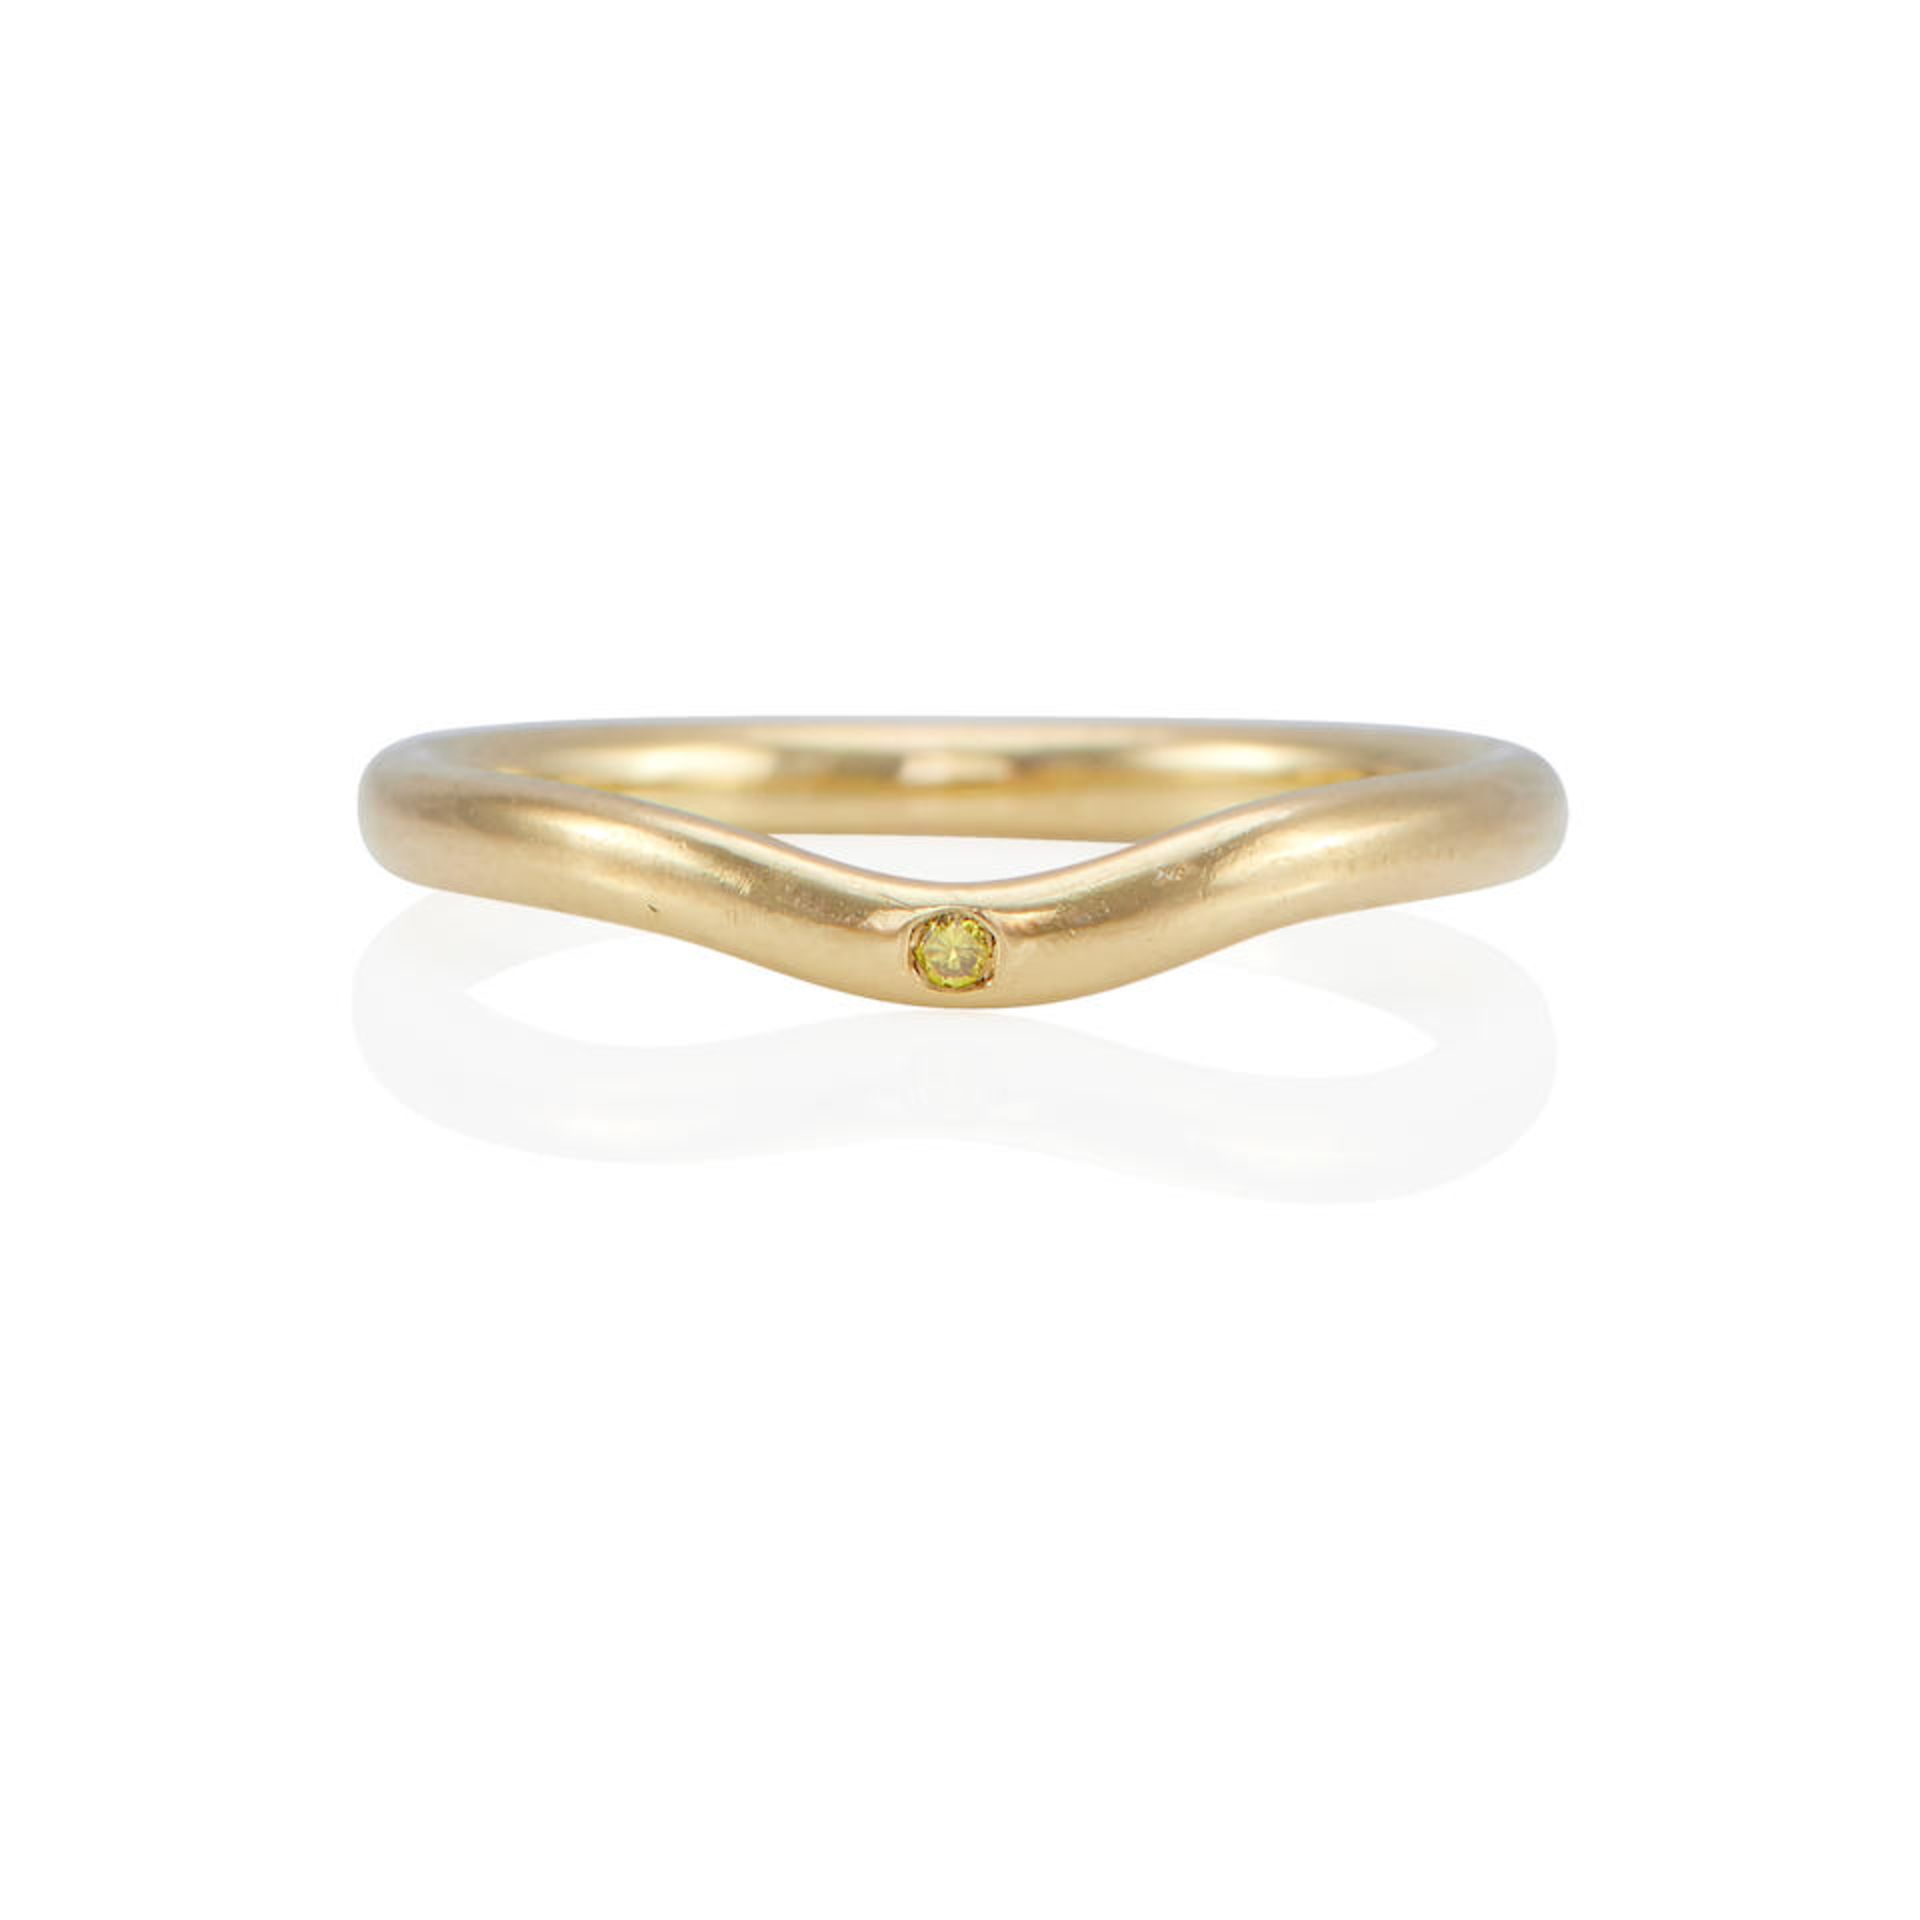 ELSA PERETTI FOR TIFFANY & CO.: AN 18K GOLD AND COLORED DIAMOND RING